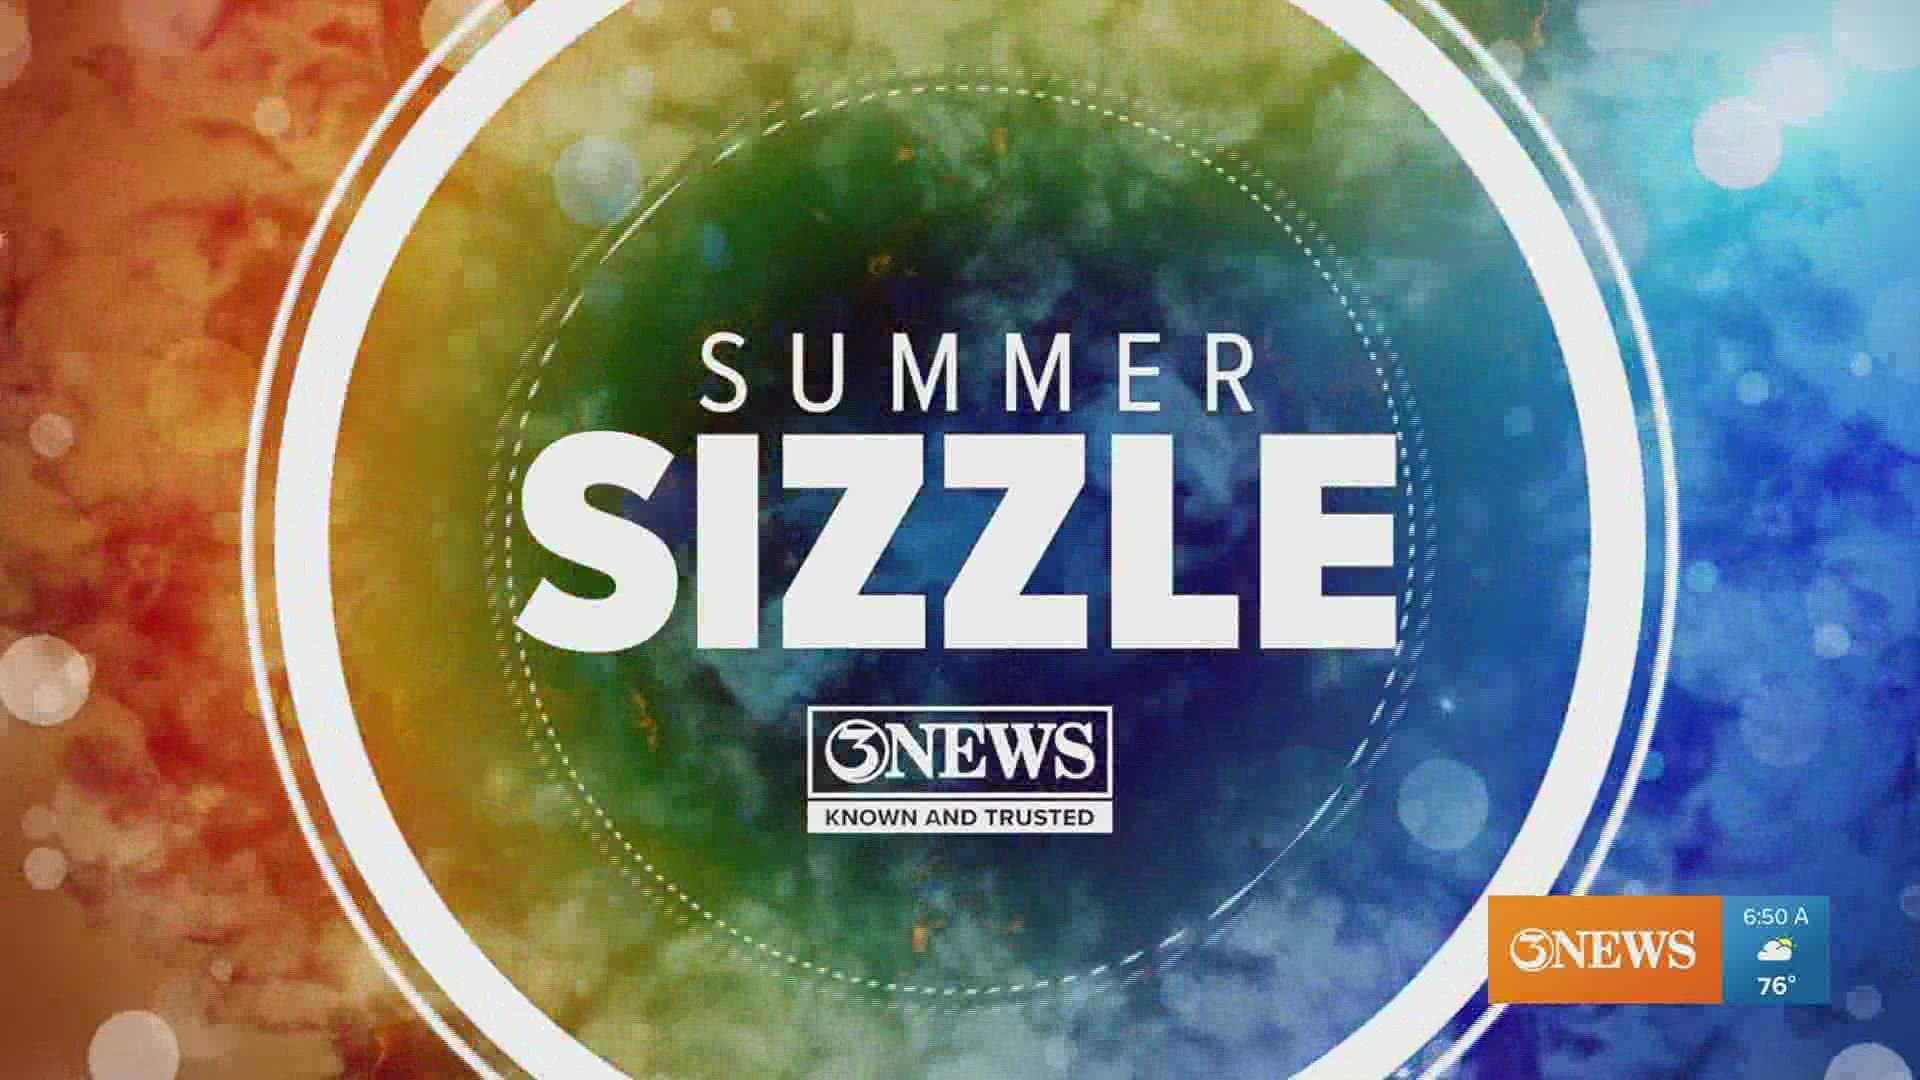 Are you looking to add to your summer plans? First Edition Reporter Julissa Garza shows how you can do just that in a new weekly segment 'Summer Sizzle.'